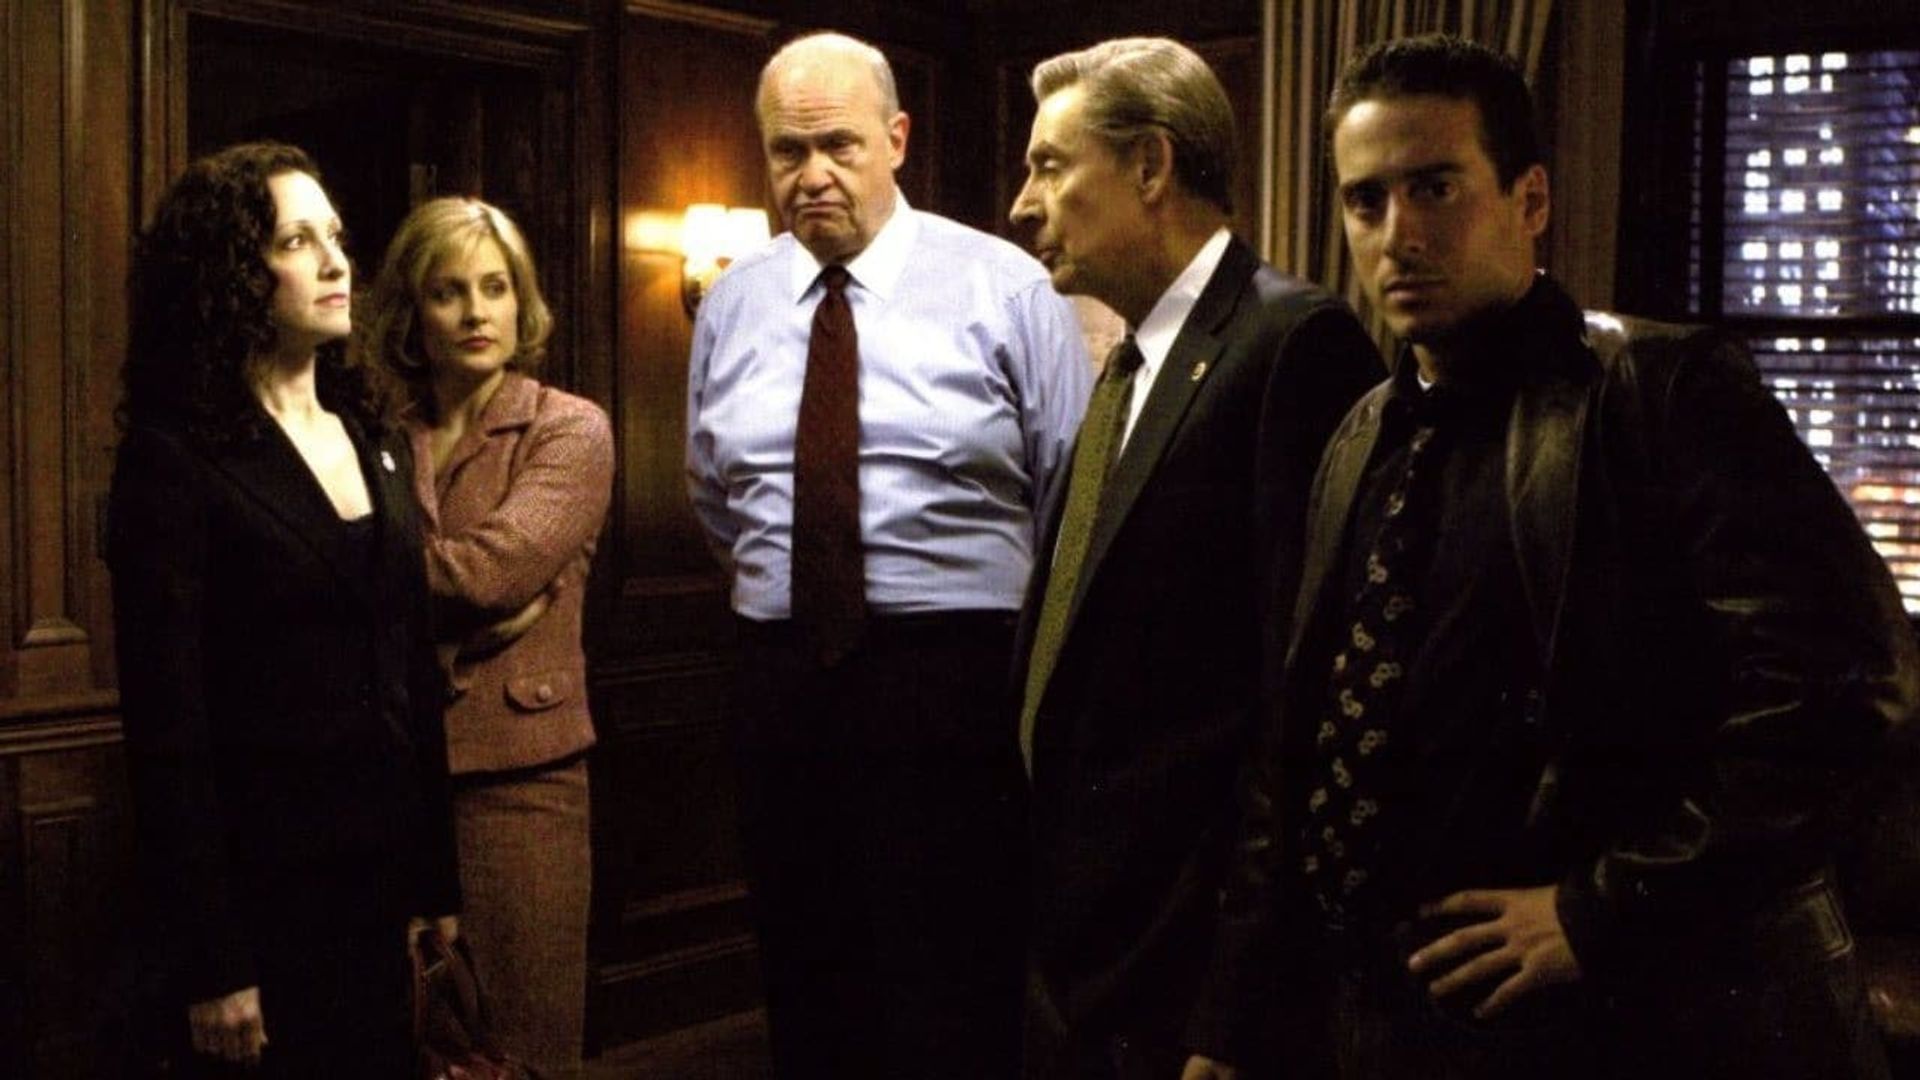 Law & Order: Trial by Jury Backdrop